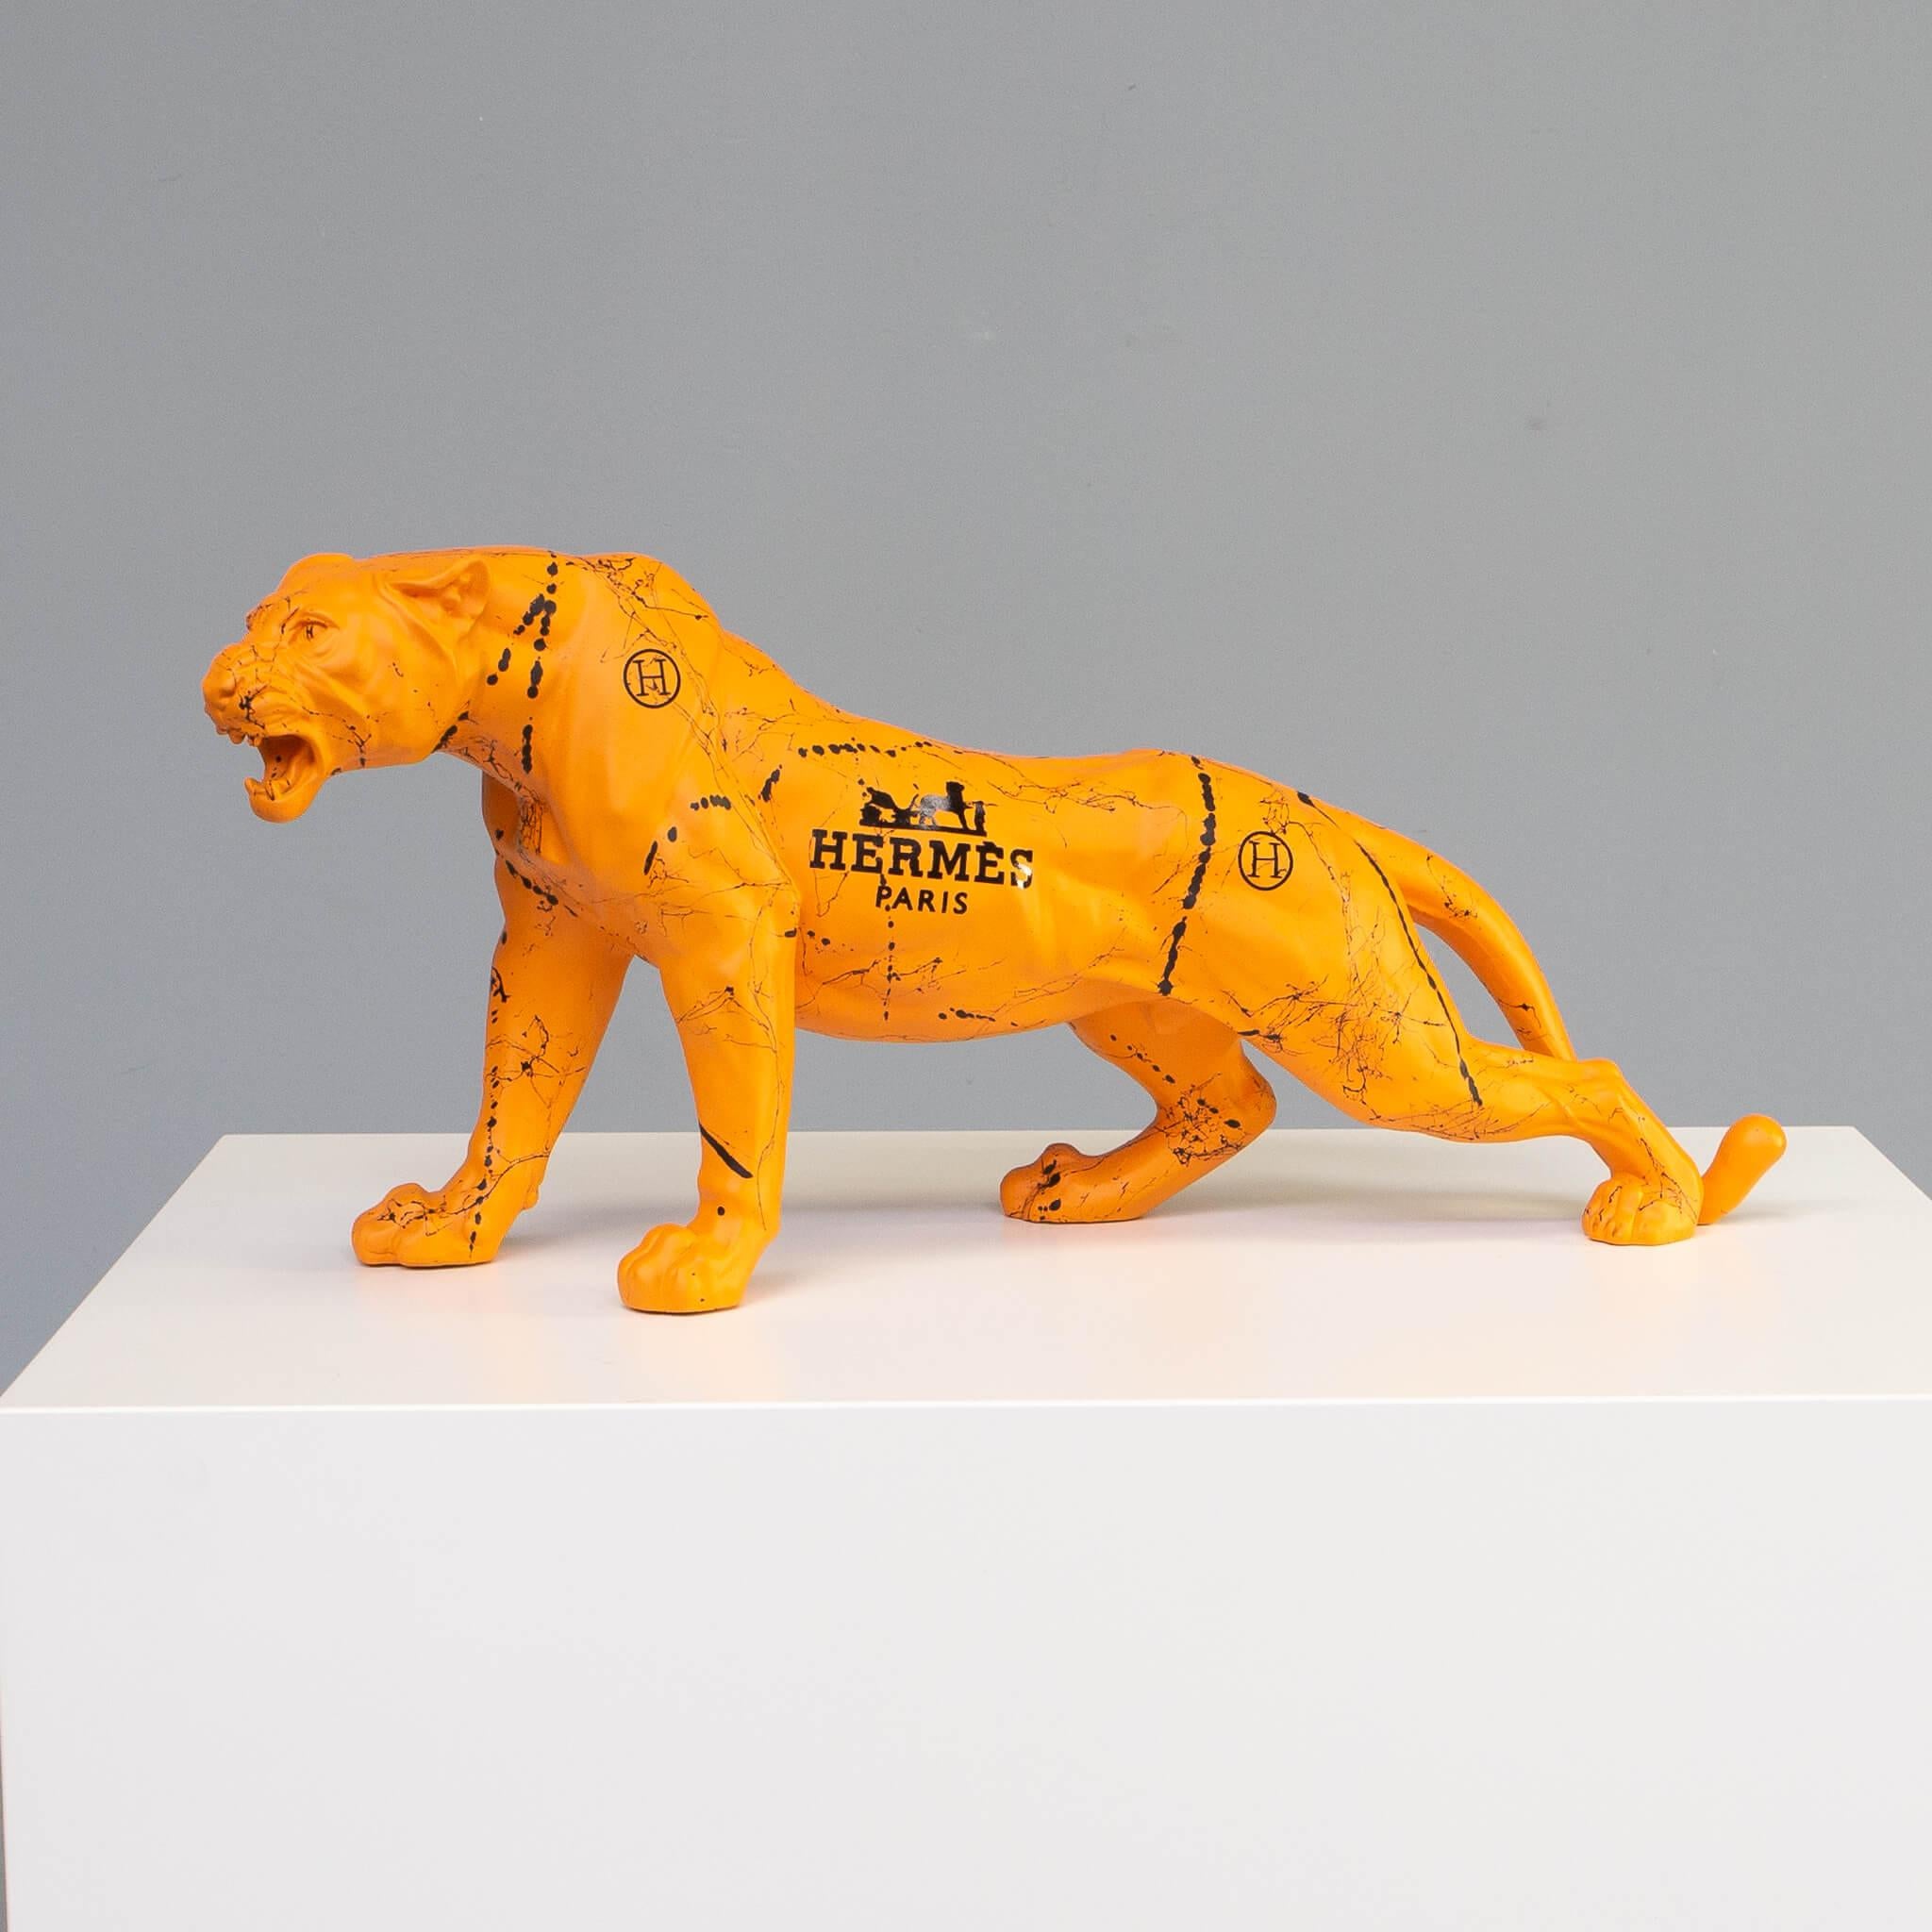 This resin sculpture was created to give style and luxury to your room. The high quality spray paint gives the feline an extraordinary look. It was finished with a layer of Mat warnish. Made by Edwart for Hermes. Only 10 pieces made, this is number